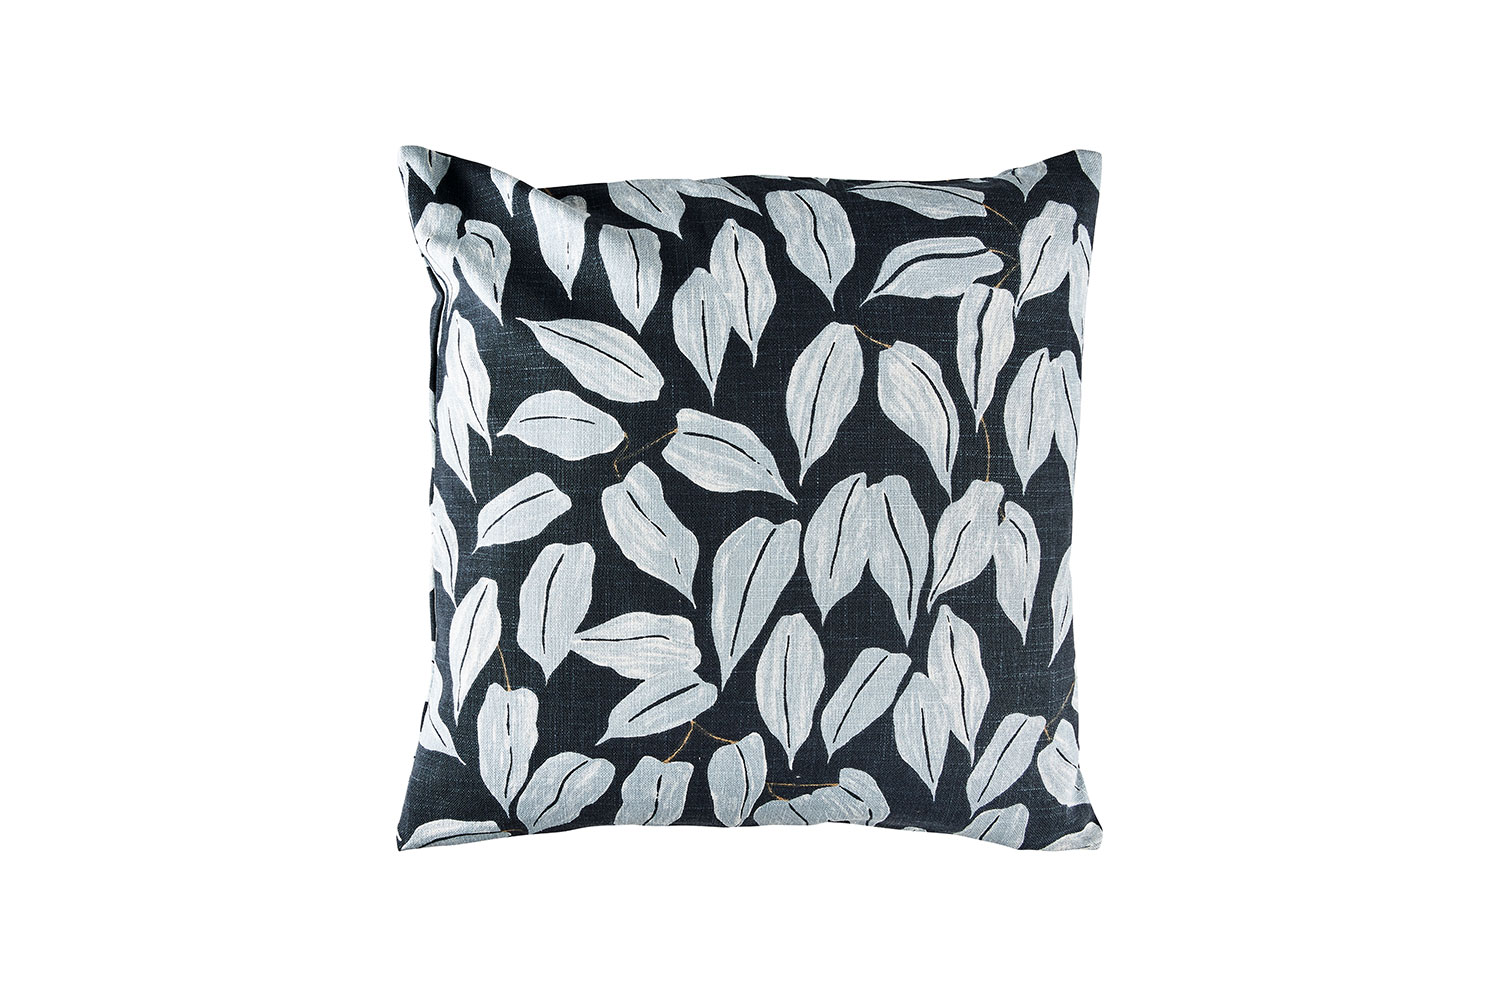 Patterned Cotton Pillow